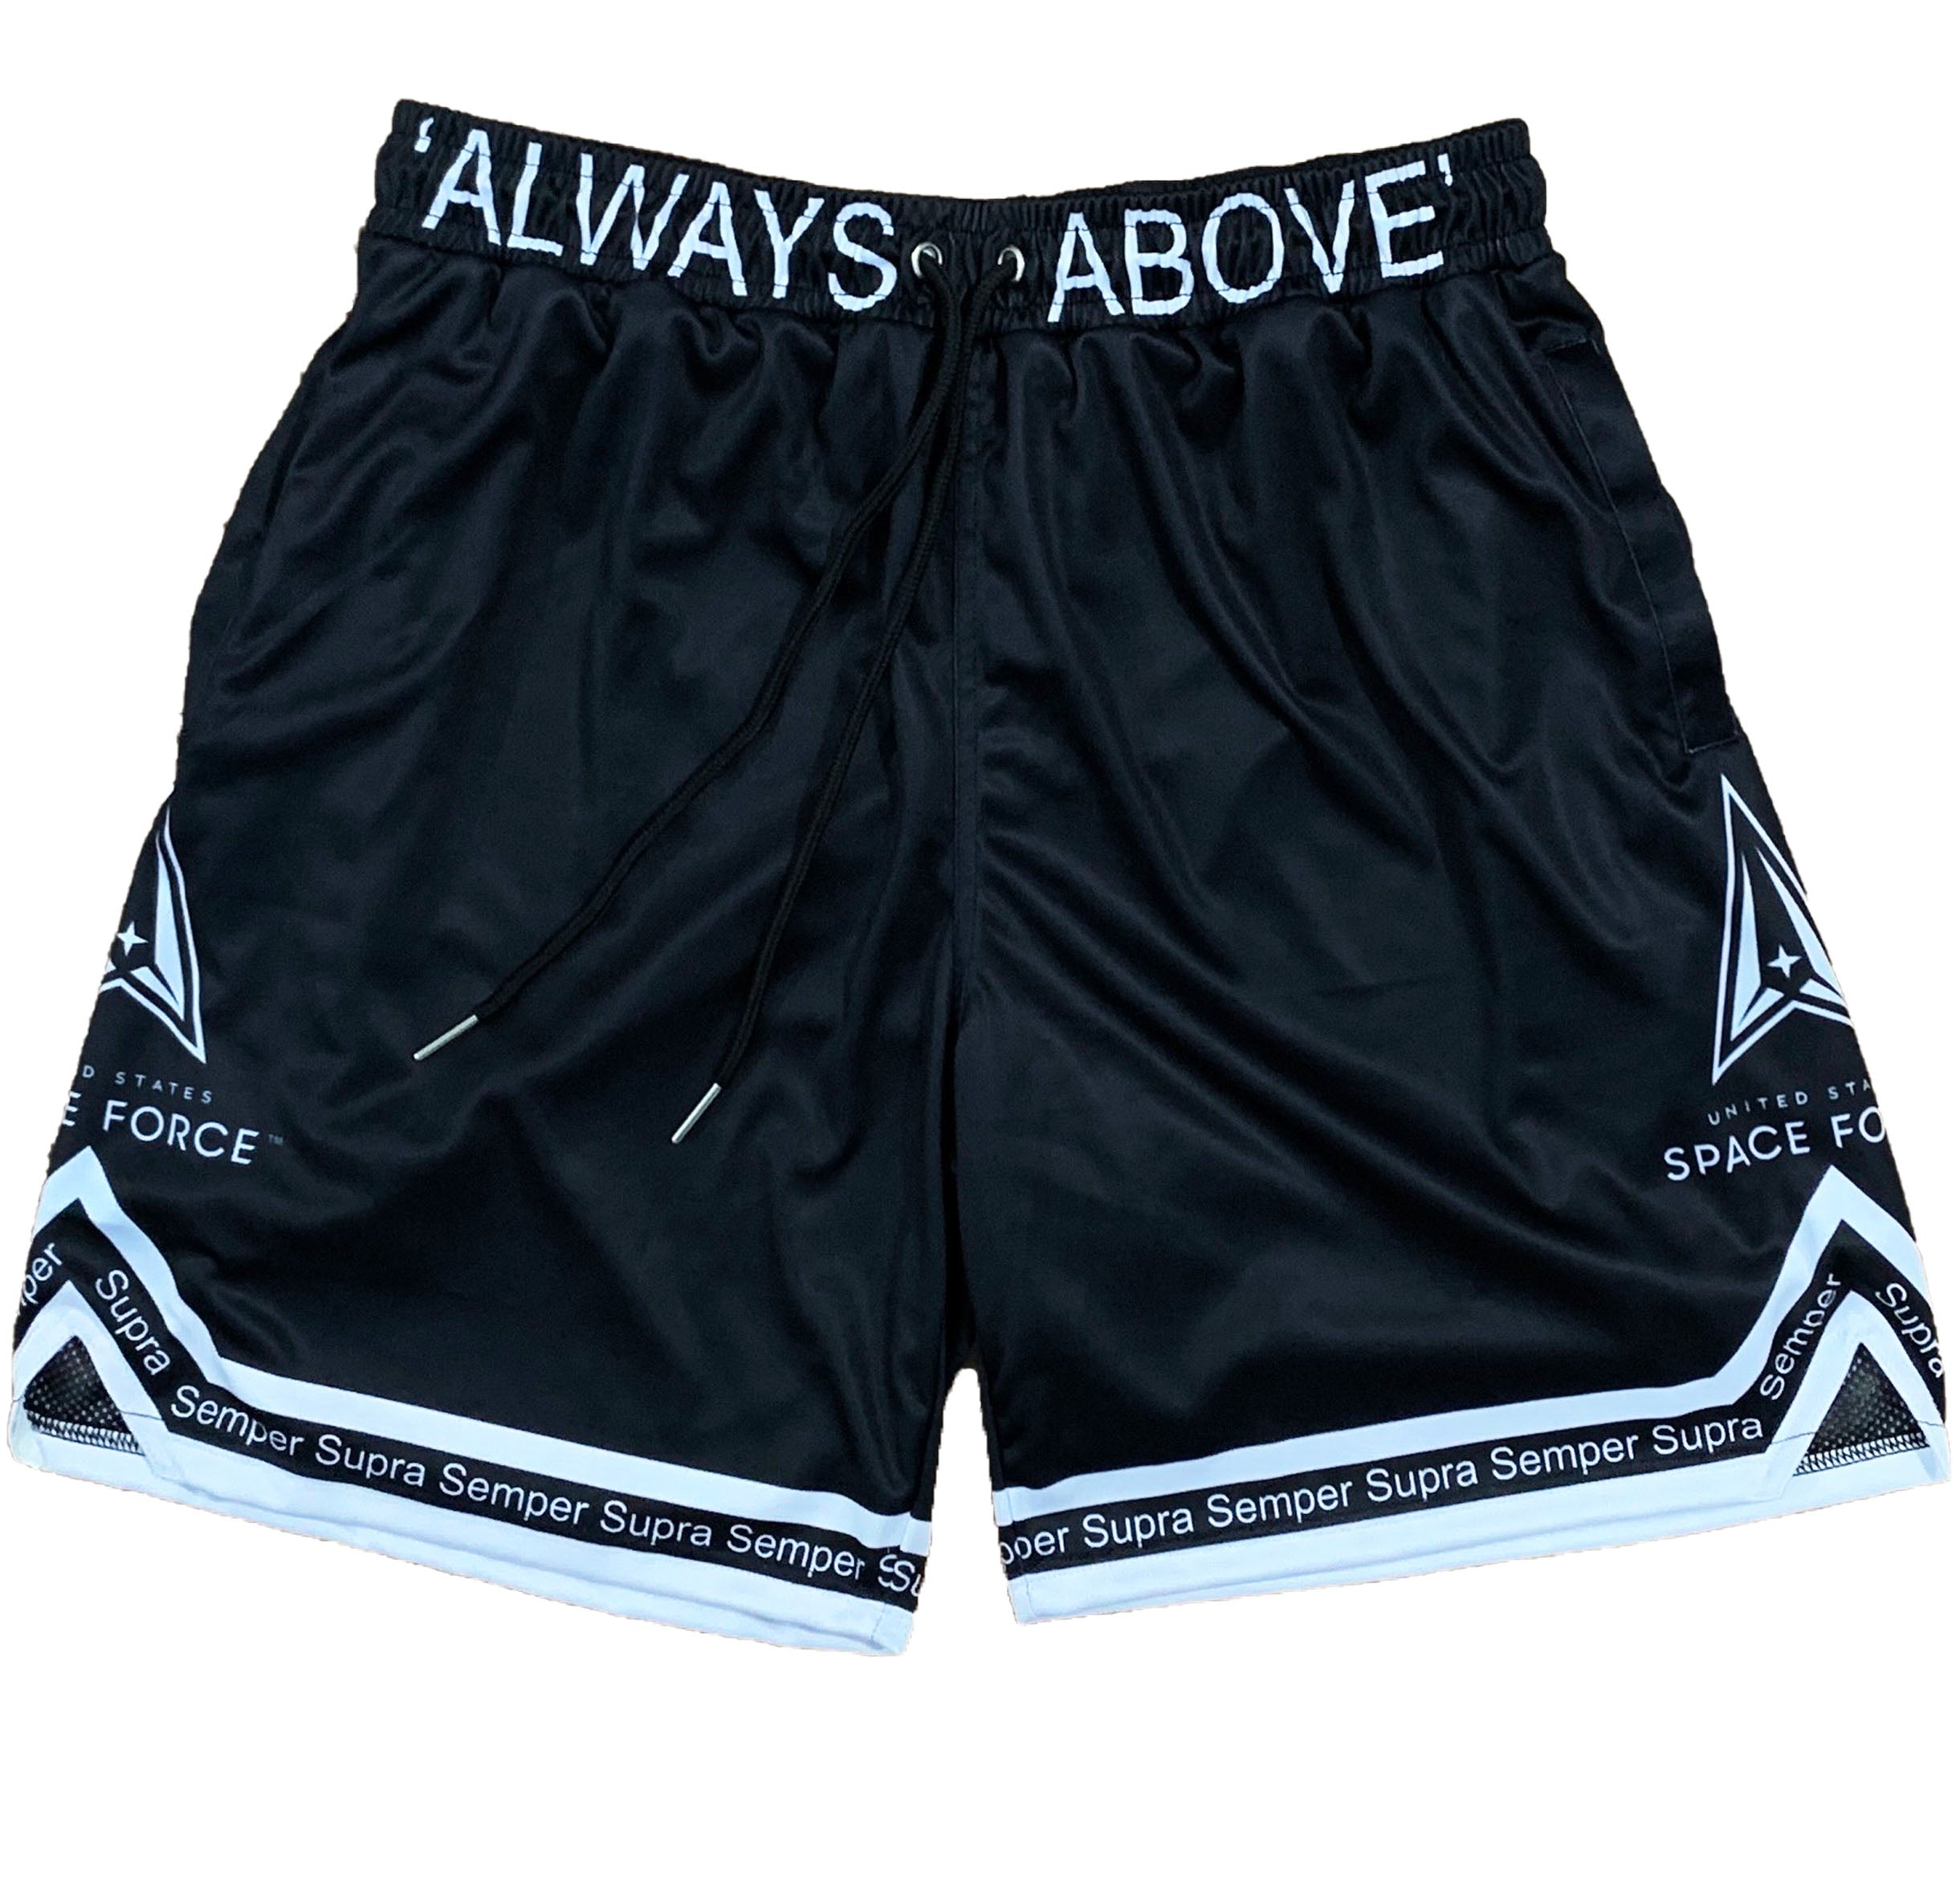 U.S. Space Force Shorts (blk)